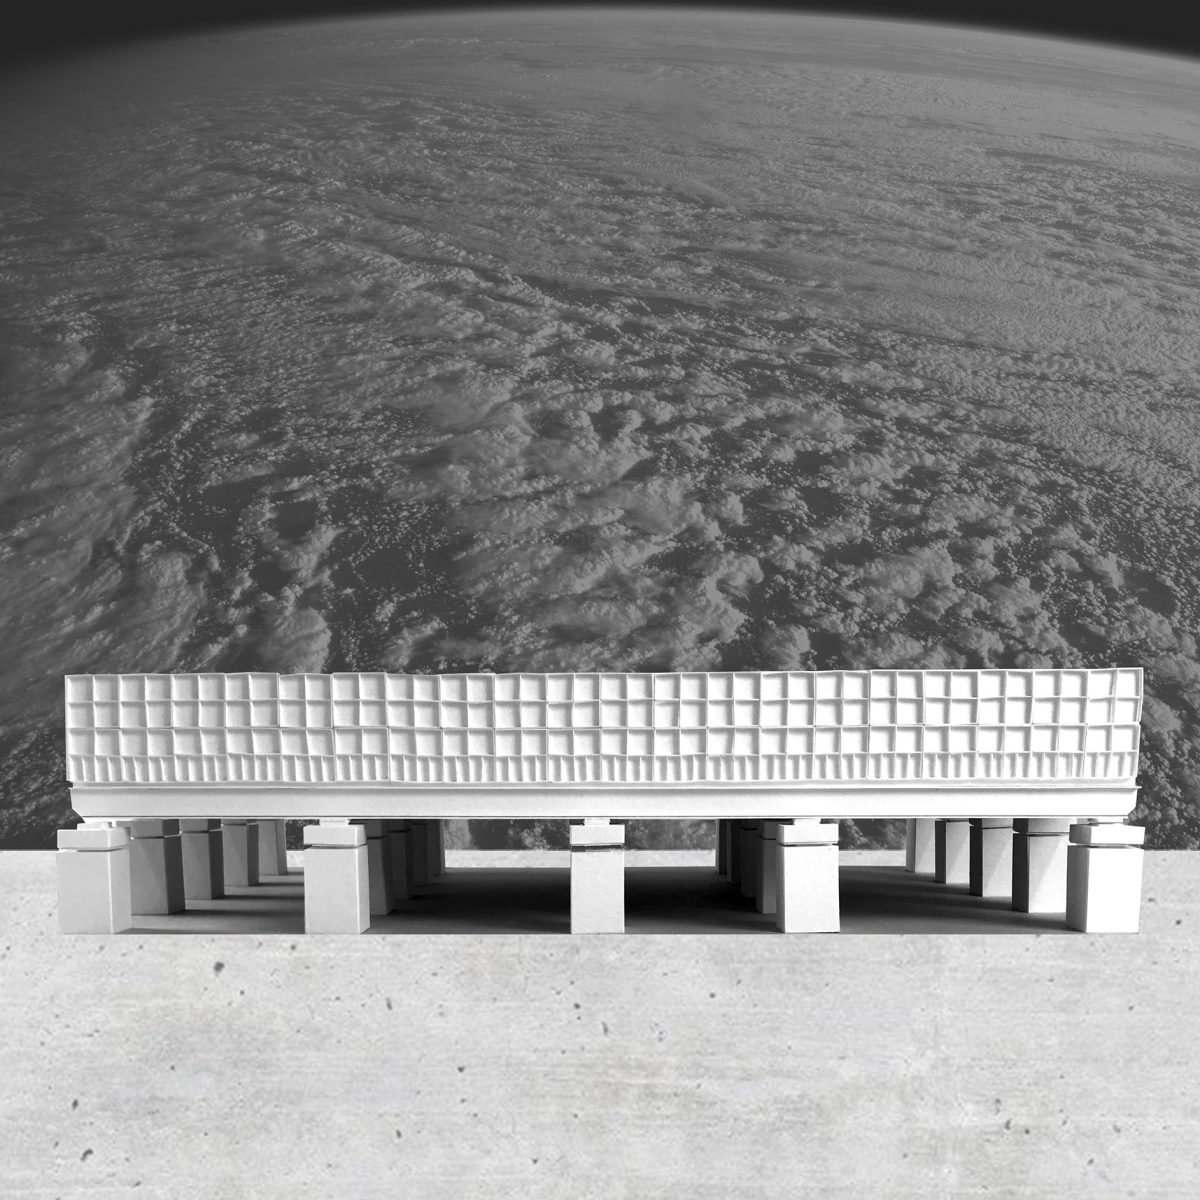 This model depicts a Victorian sludge tank adjacent to the site. Its platonic, modular construction mirrors the reservoir’s repetitive brick arches, and the component-based architecture of the proposal.